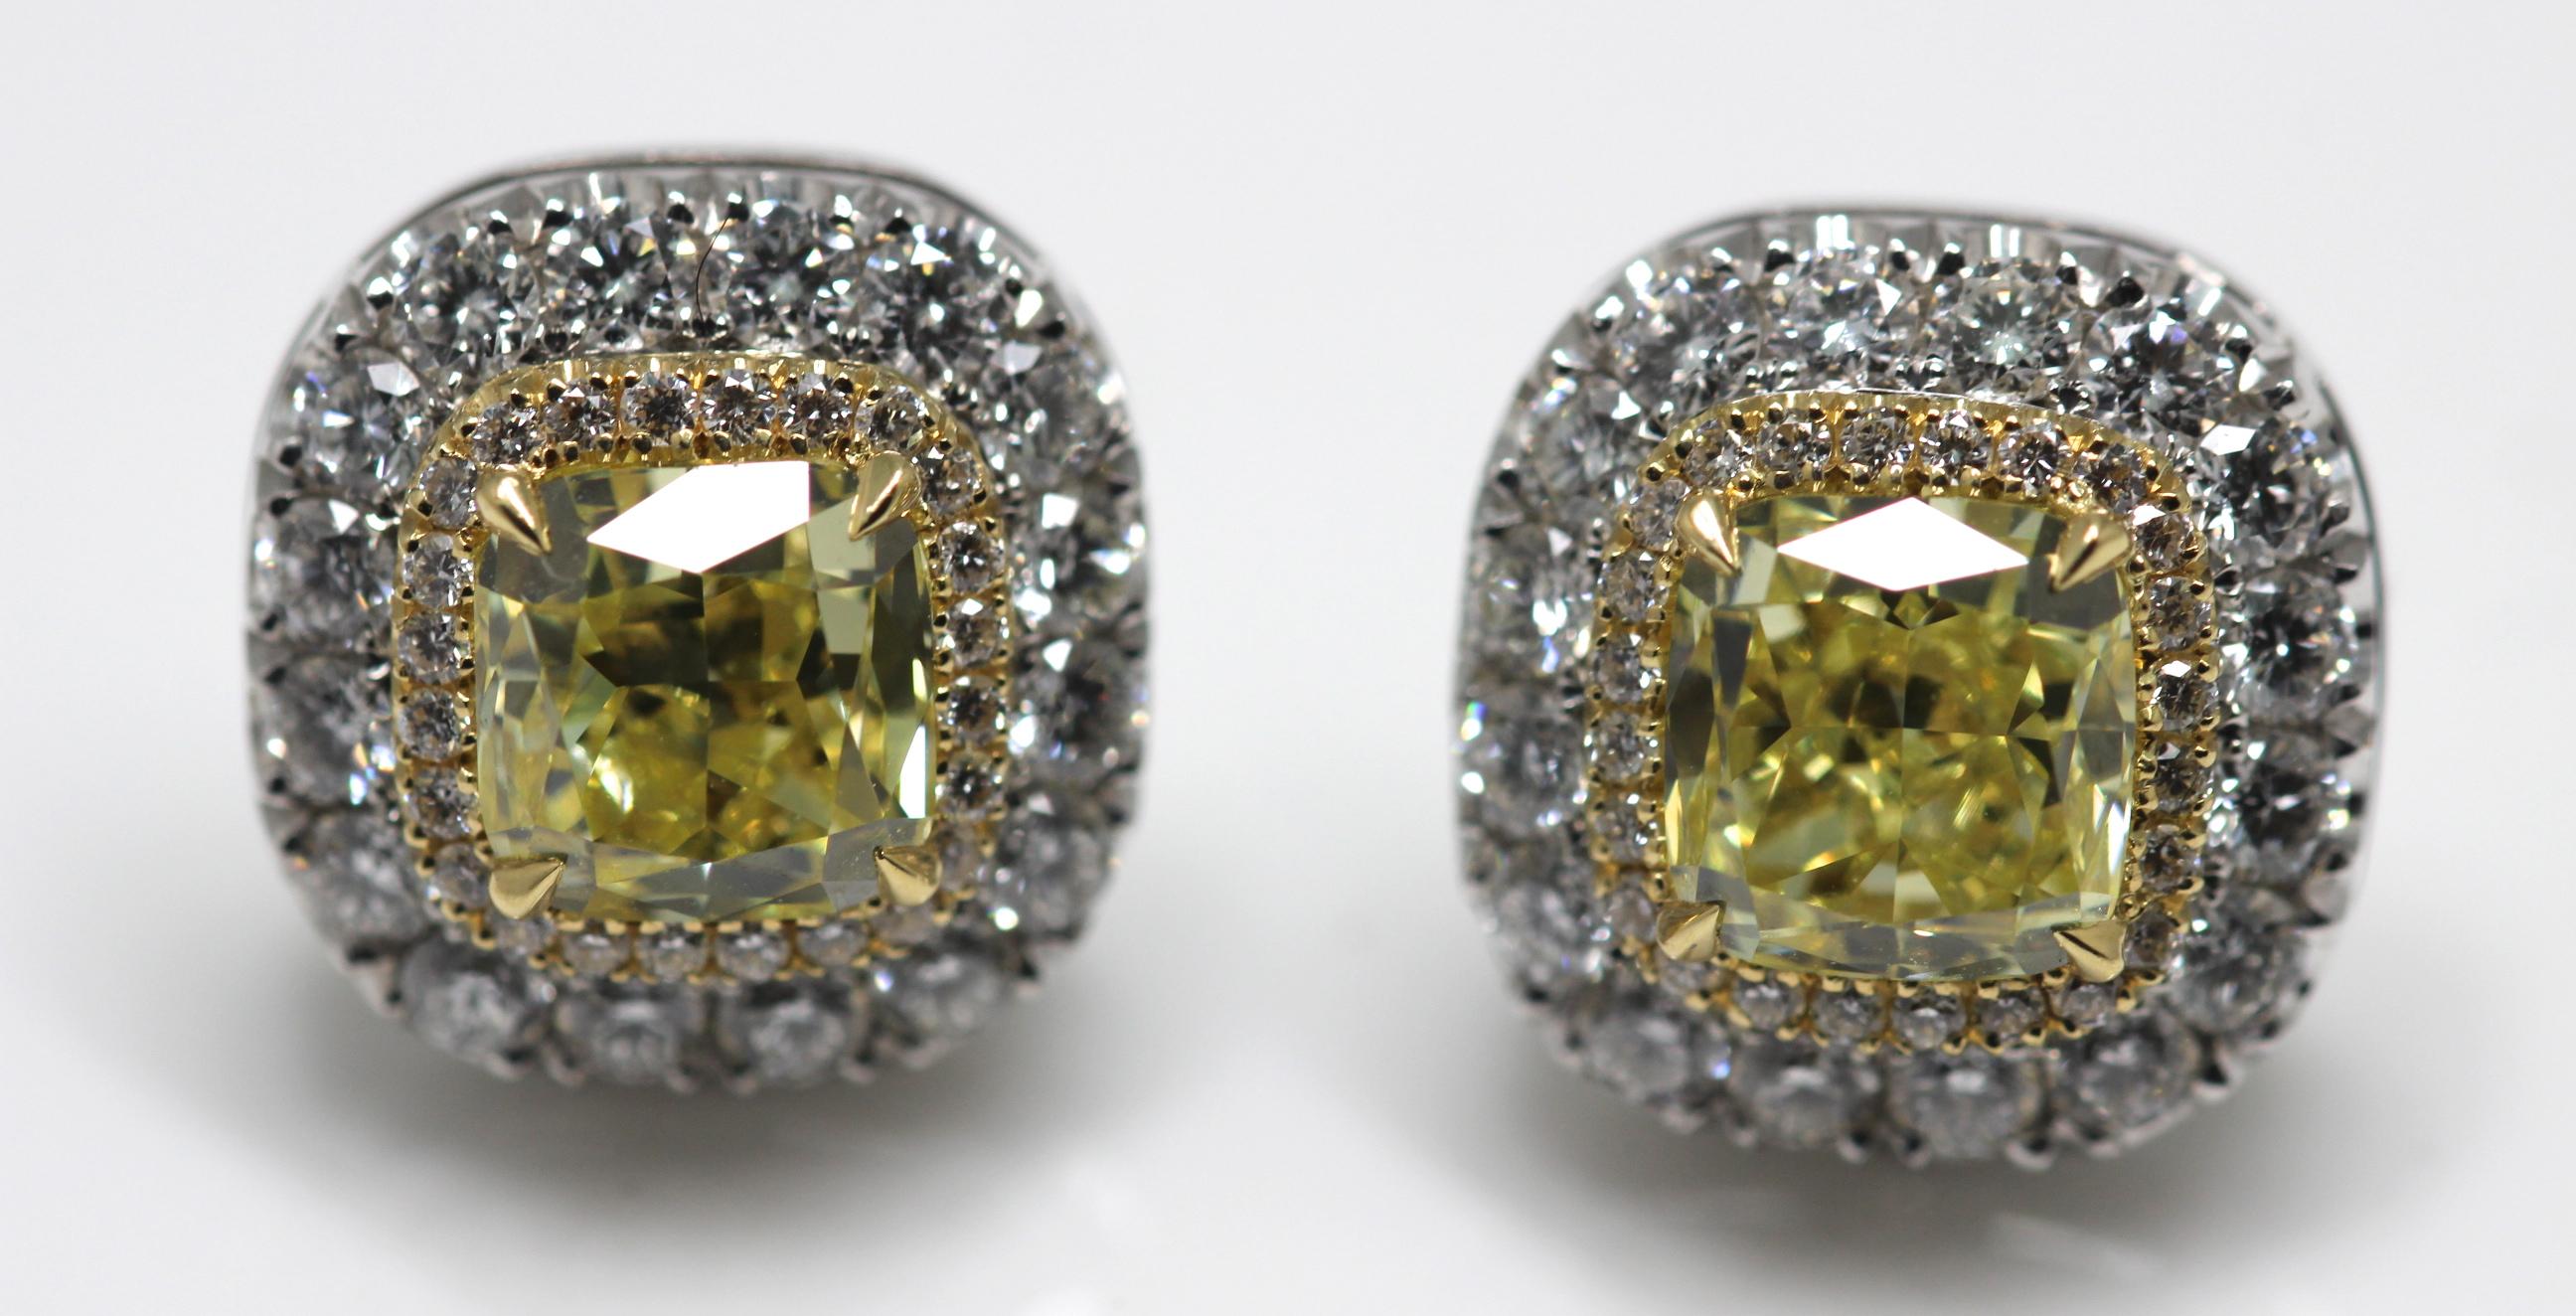 GIA Certified Fancy Intense Yellow Diamond Earrings Mounted in Platinum and Gold 1